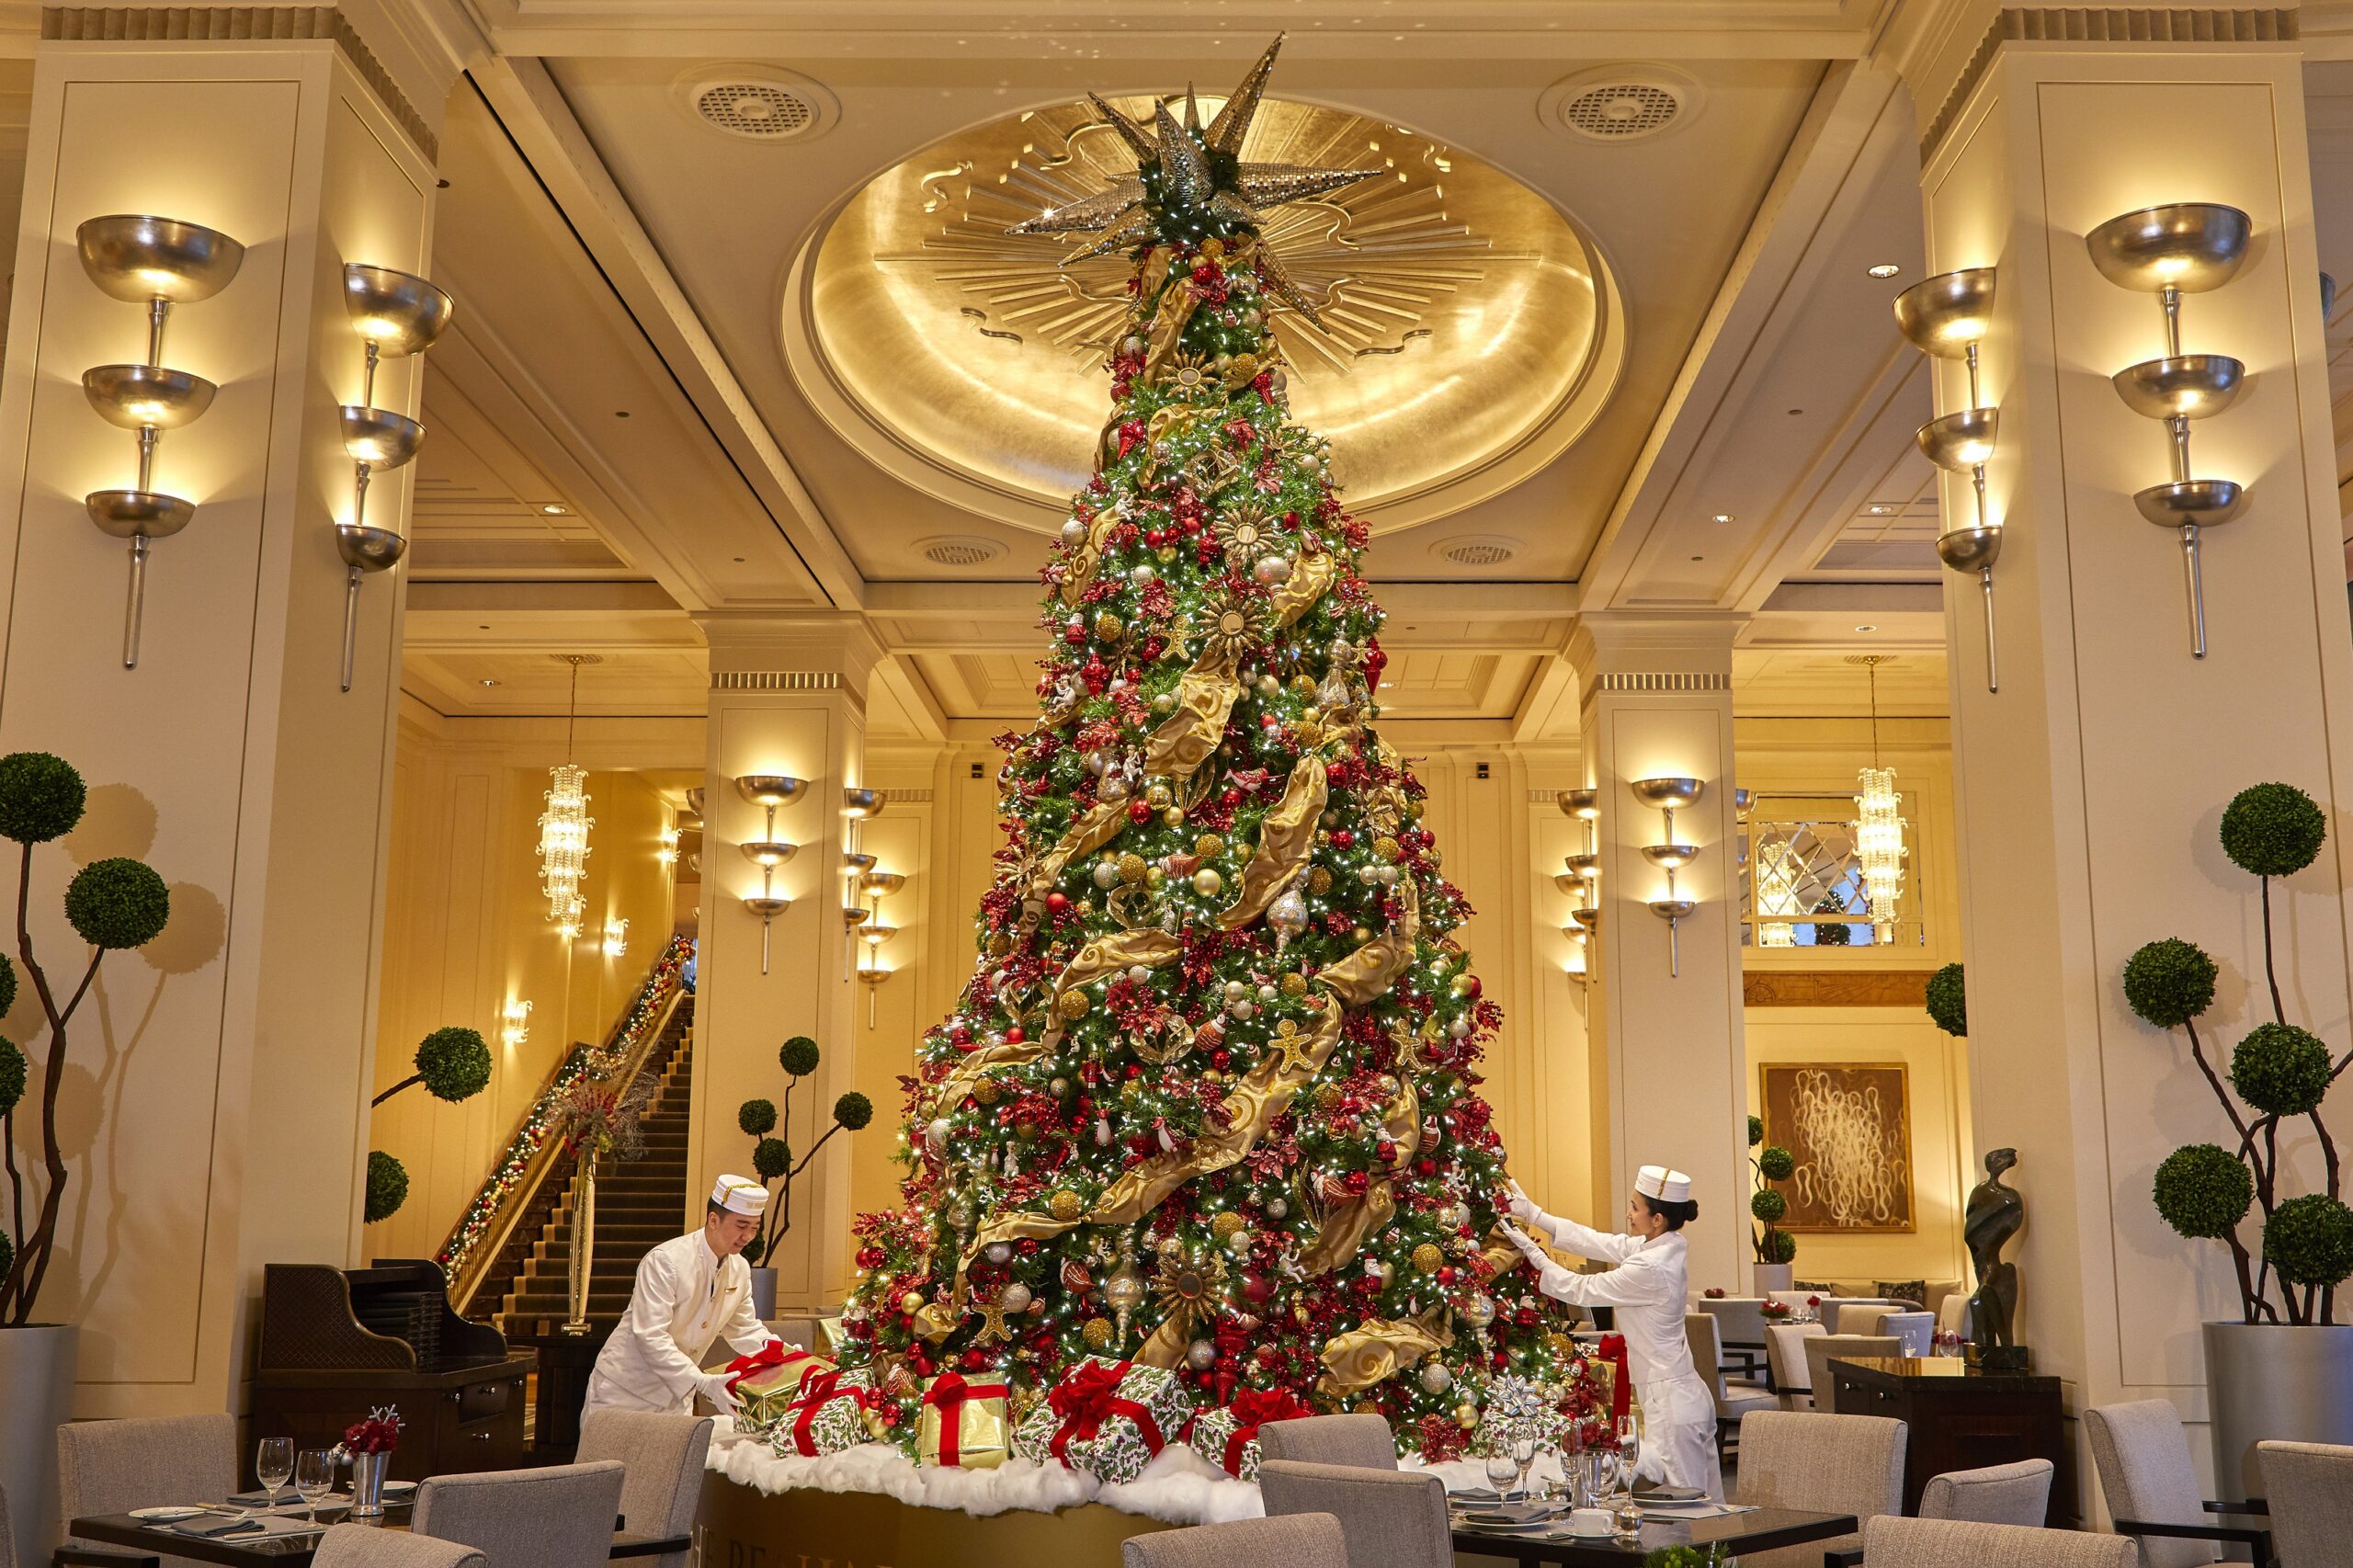 The Peninsula Holiday for Christmas, Tree, Ornaments, Event Design, KEHOE DESIGNS, Chicago Holiday